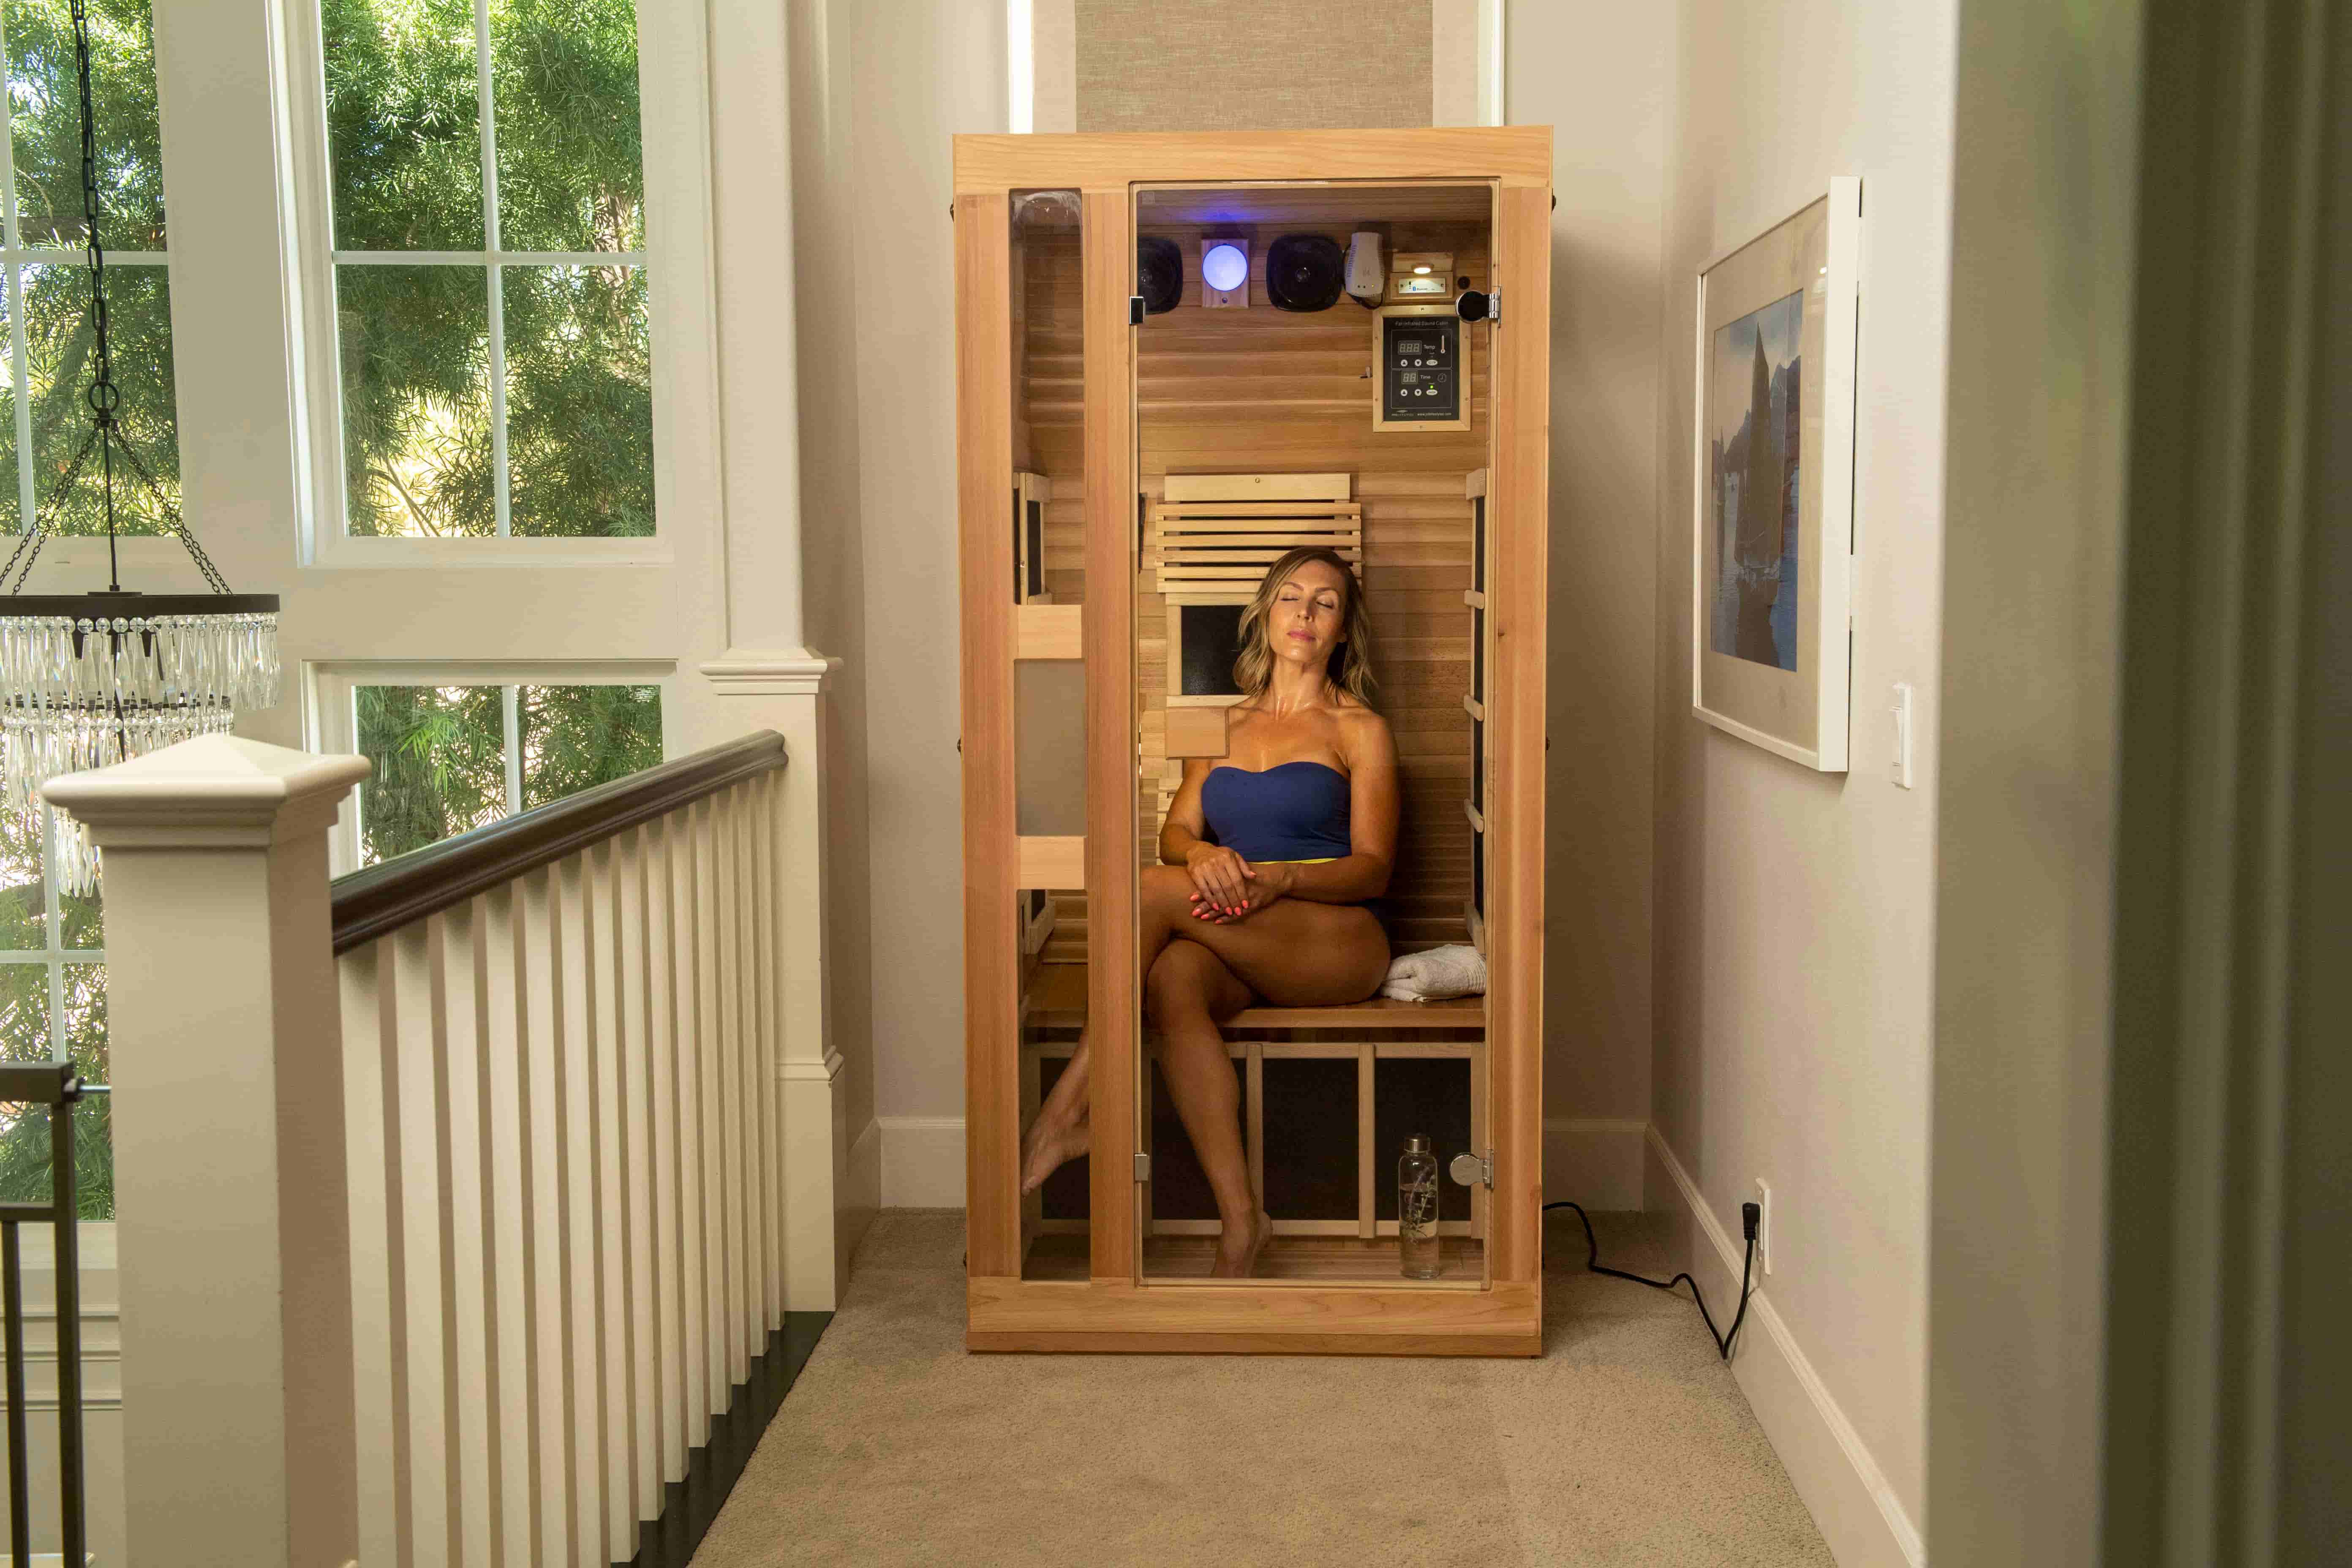 Where Should I Place My Infrared Sauna? Frequently Asked Questions